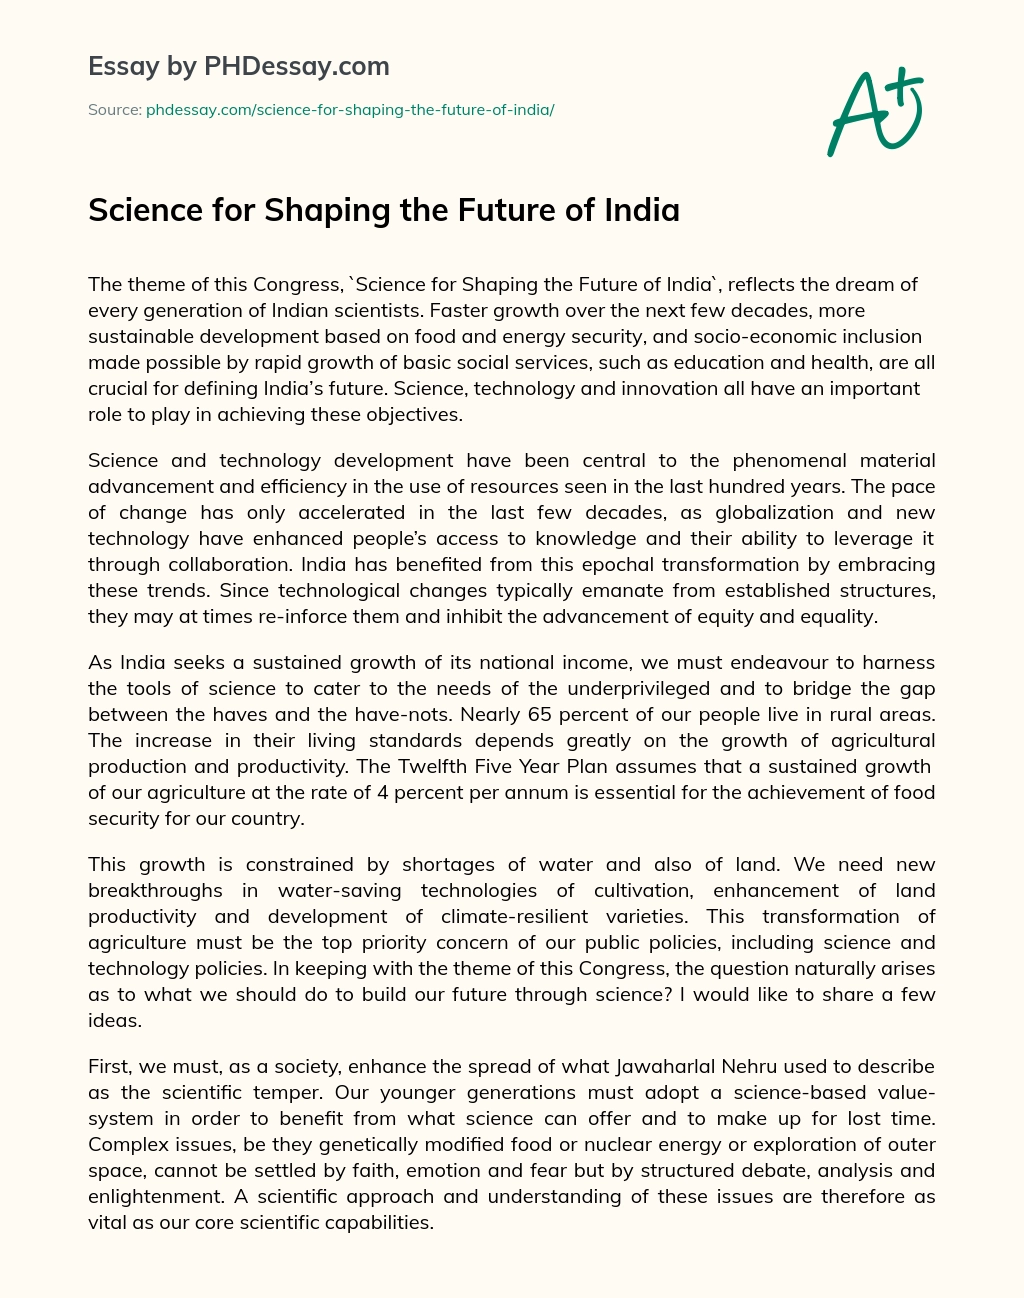 Science for Shaping the Future of India essay